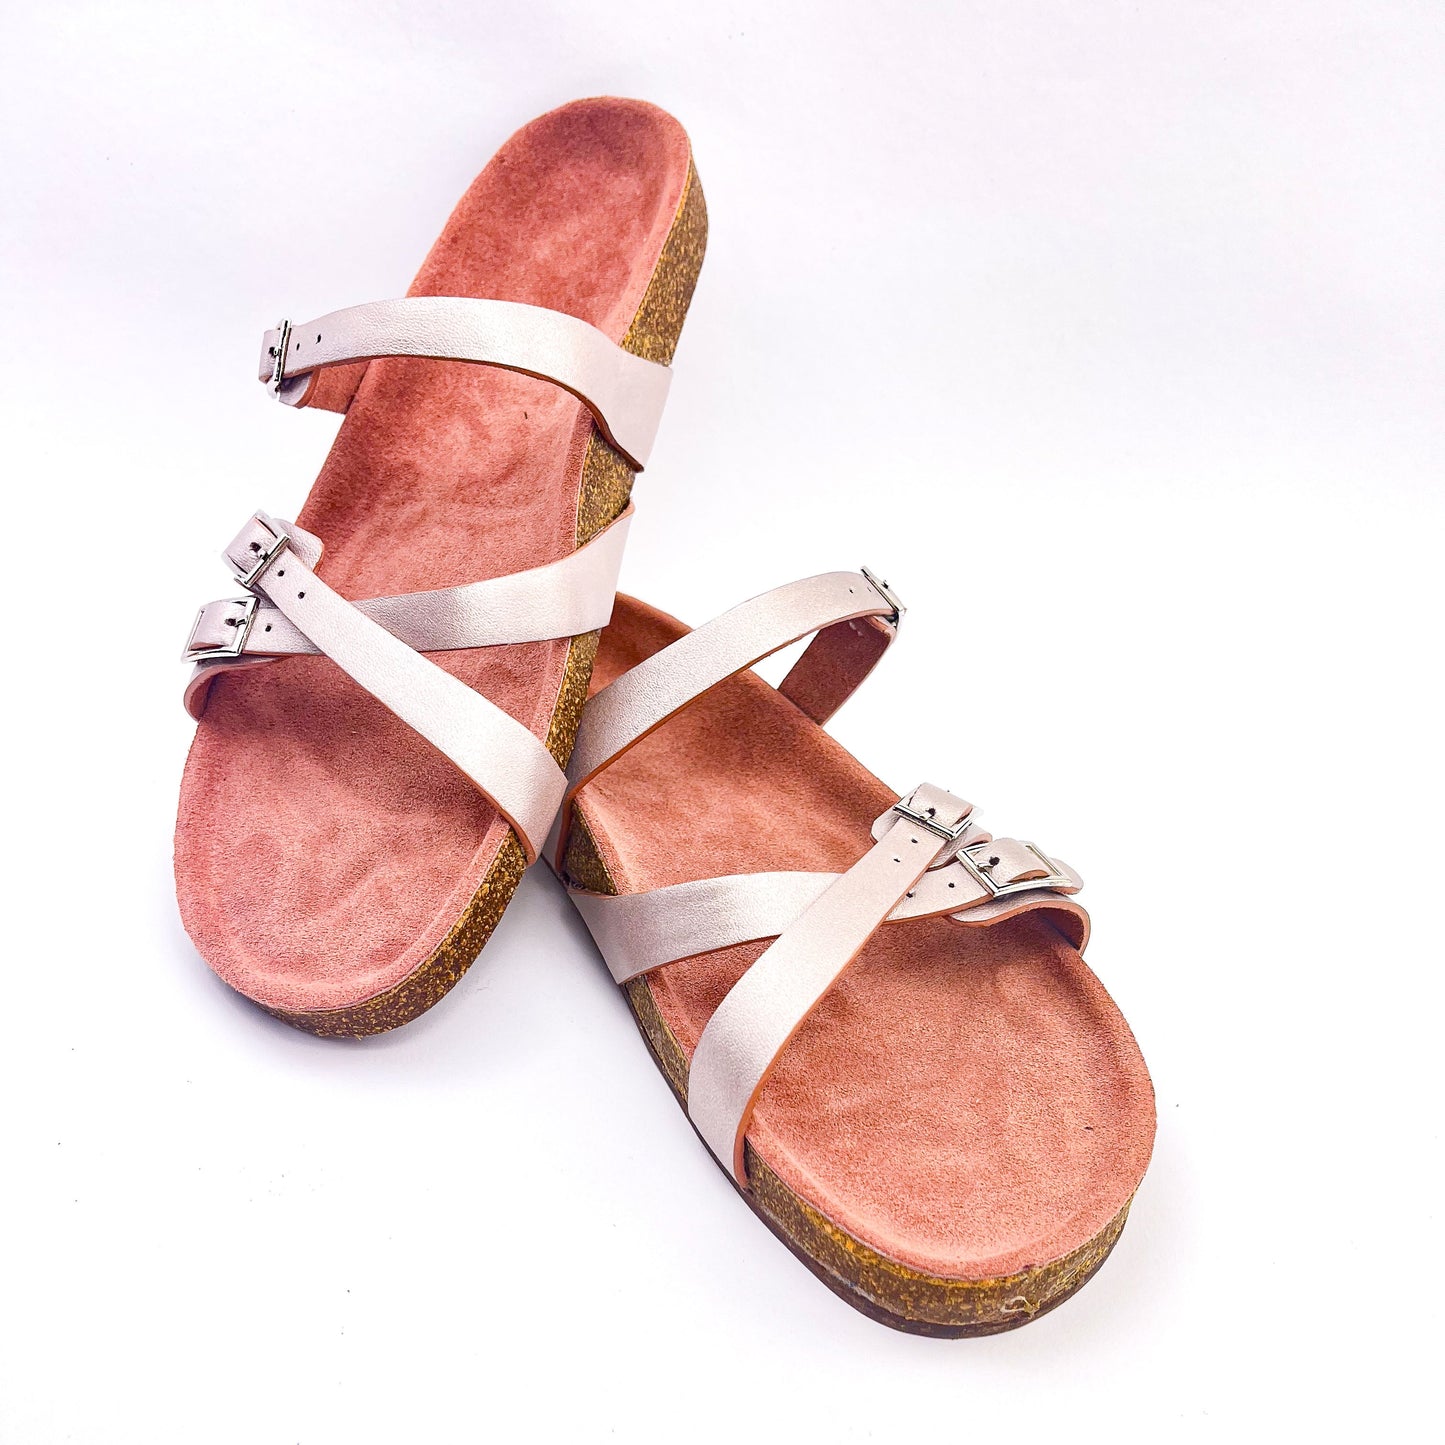 DIY Box: The Sandal Collection *Narrow Straps* – STORY SALE